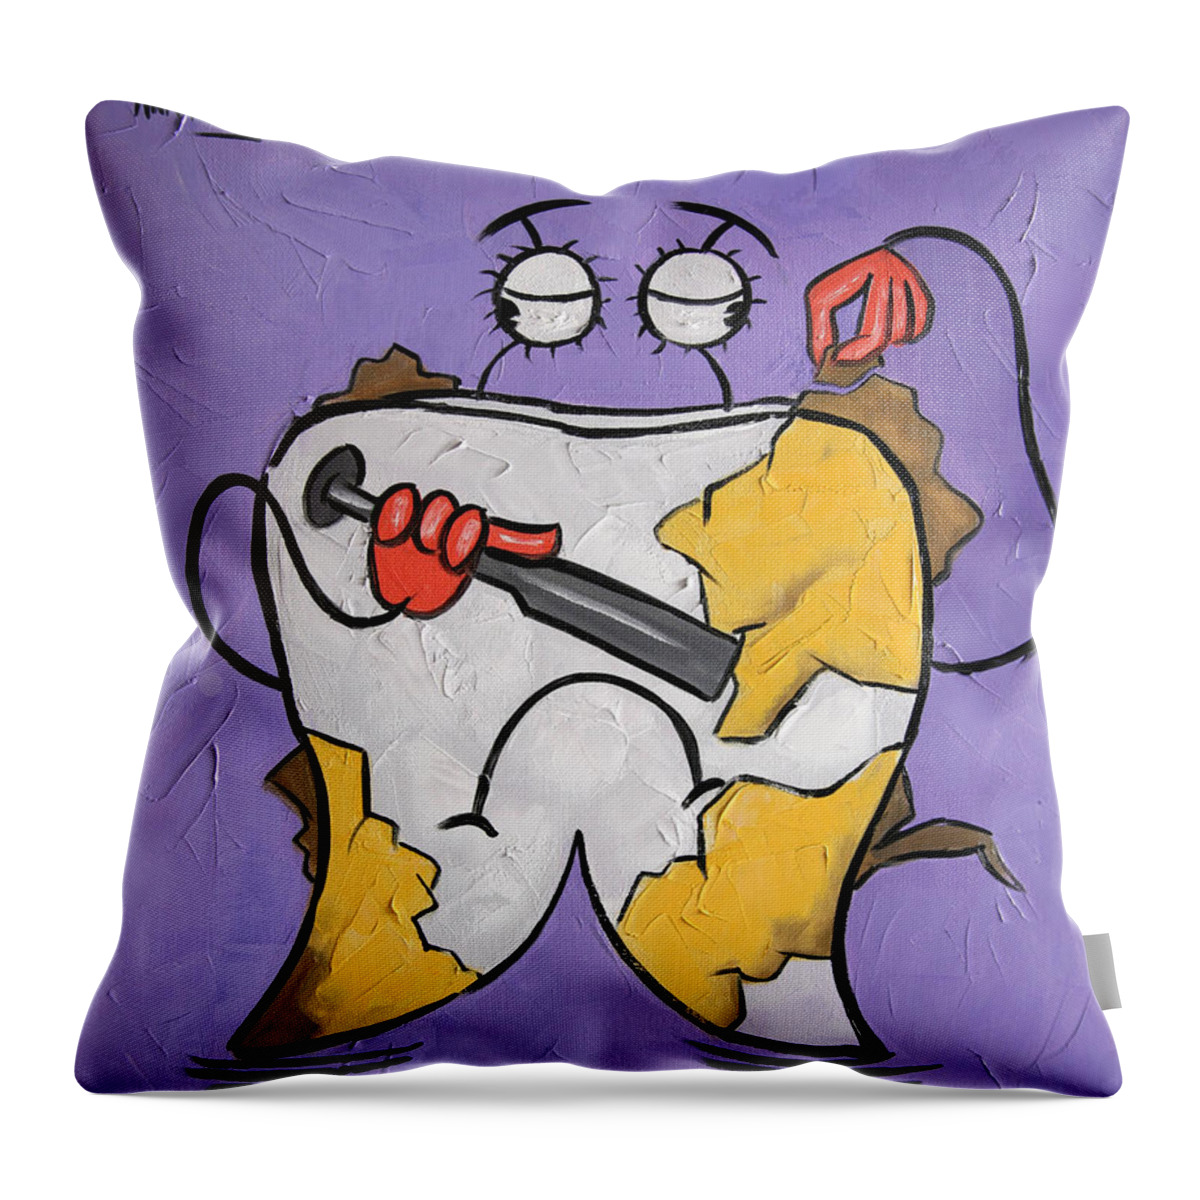 Plaque Tooth Throw Pillow featuring the painting Plaque Tooth by Anthony Falbo